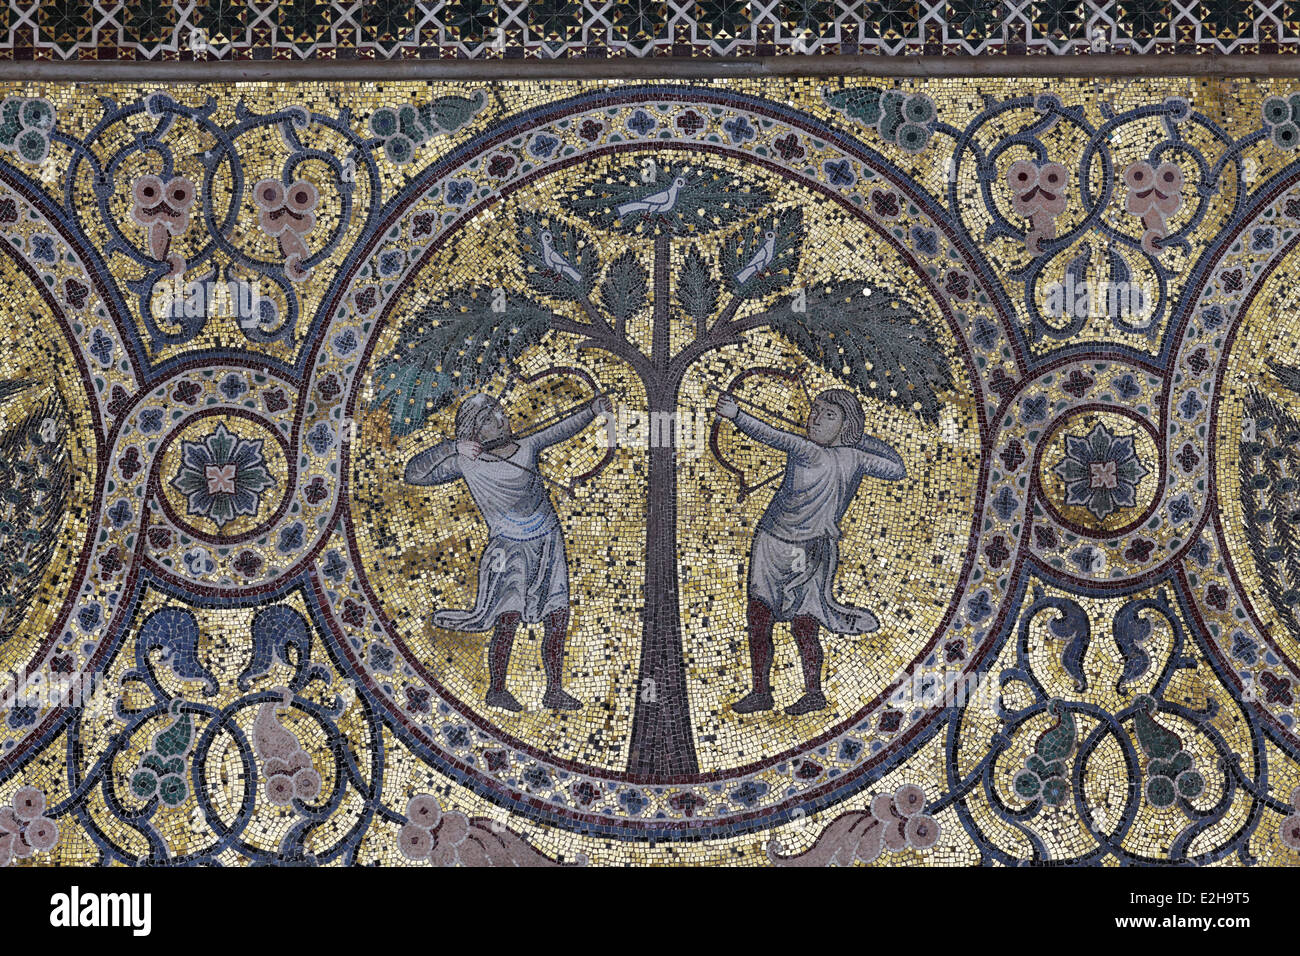 Byzantine mosaic, two Norman archers in the Norman castle of La Zisa, Zisa Castle, Palermo, Sicily, Italy Stock Photo